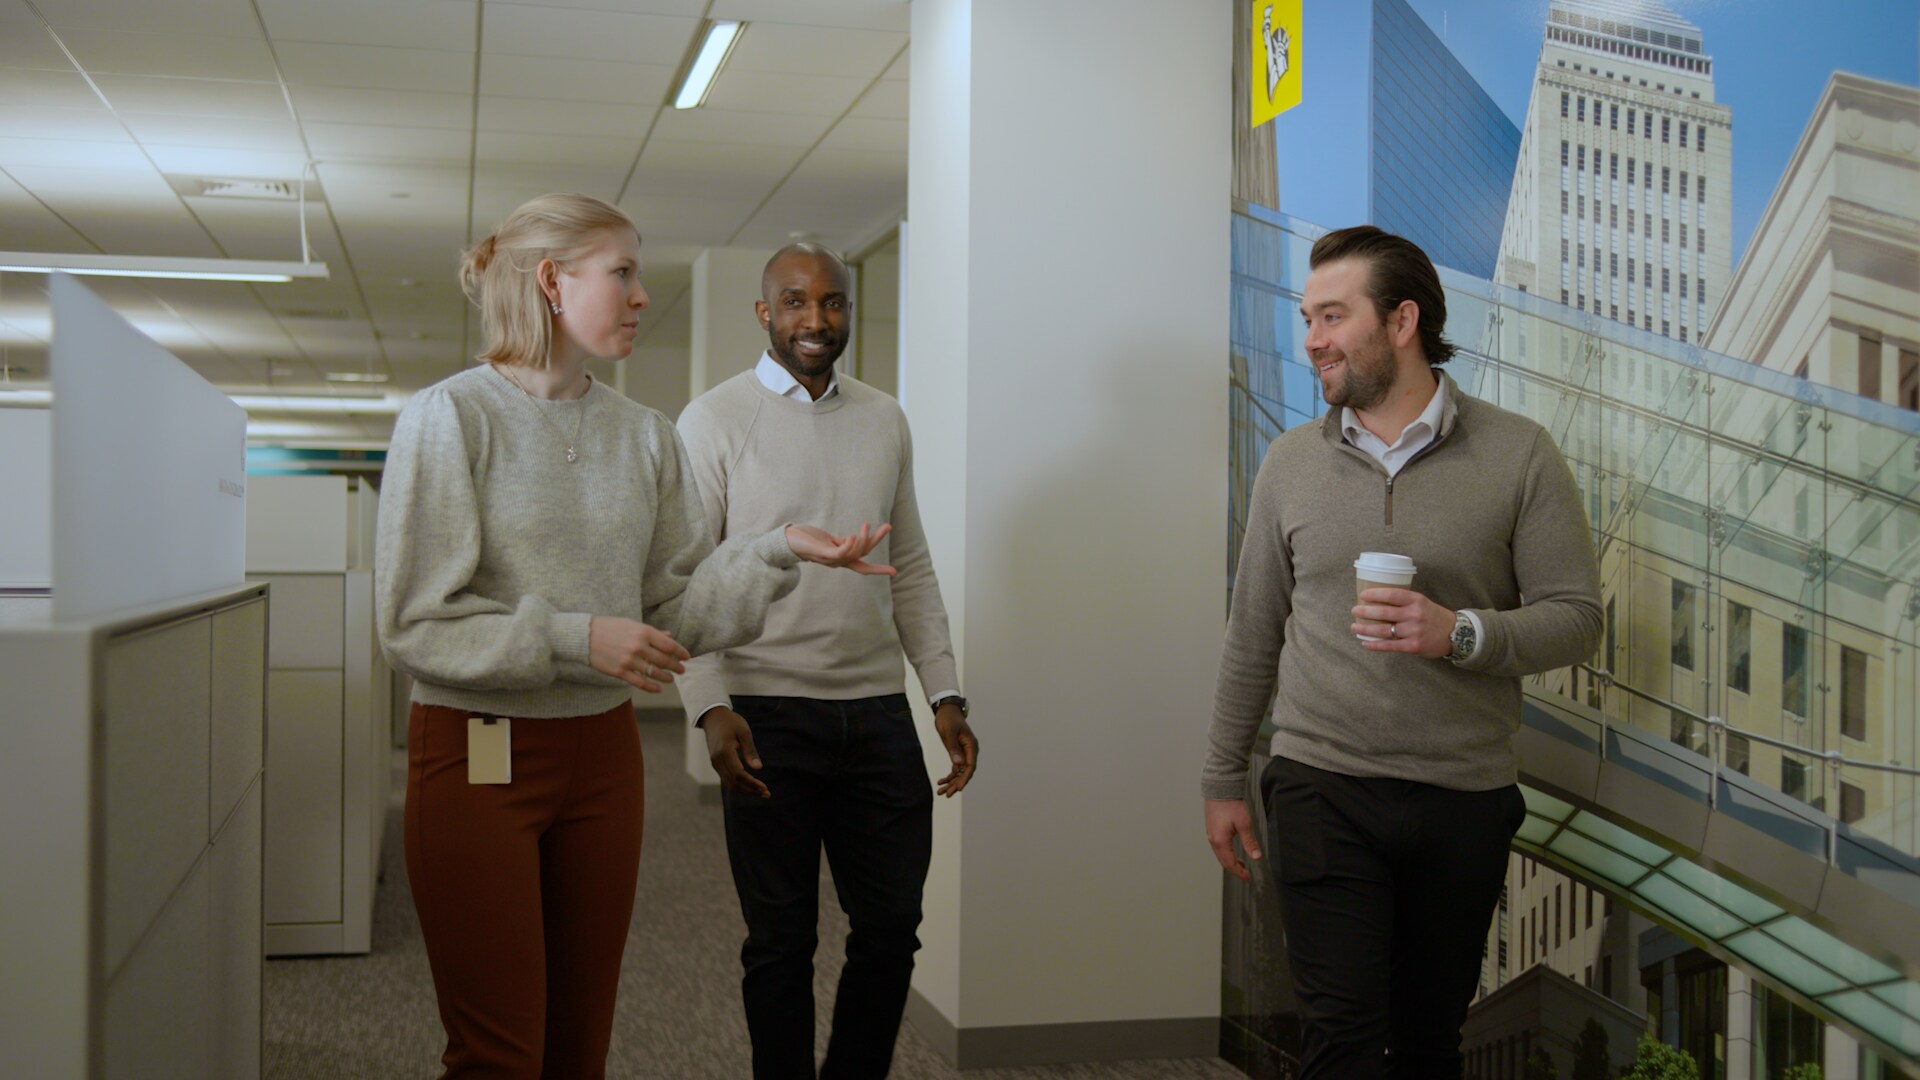 Group of employees standing and chatting in an office setting